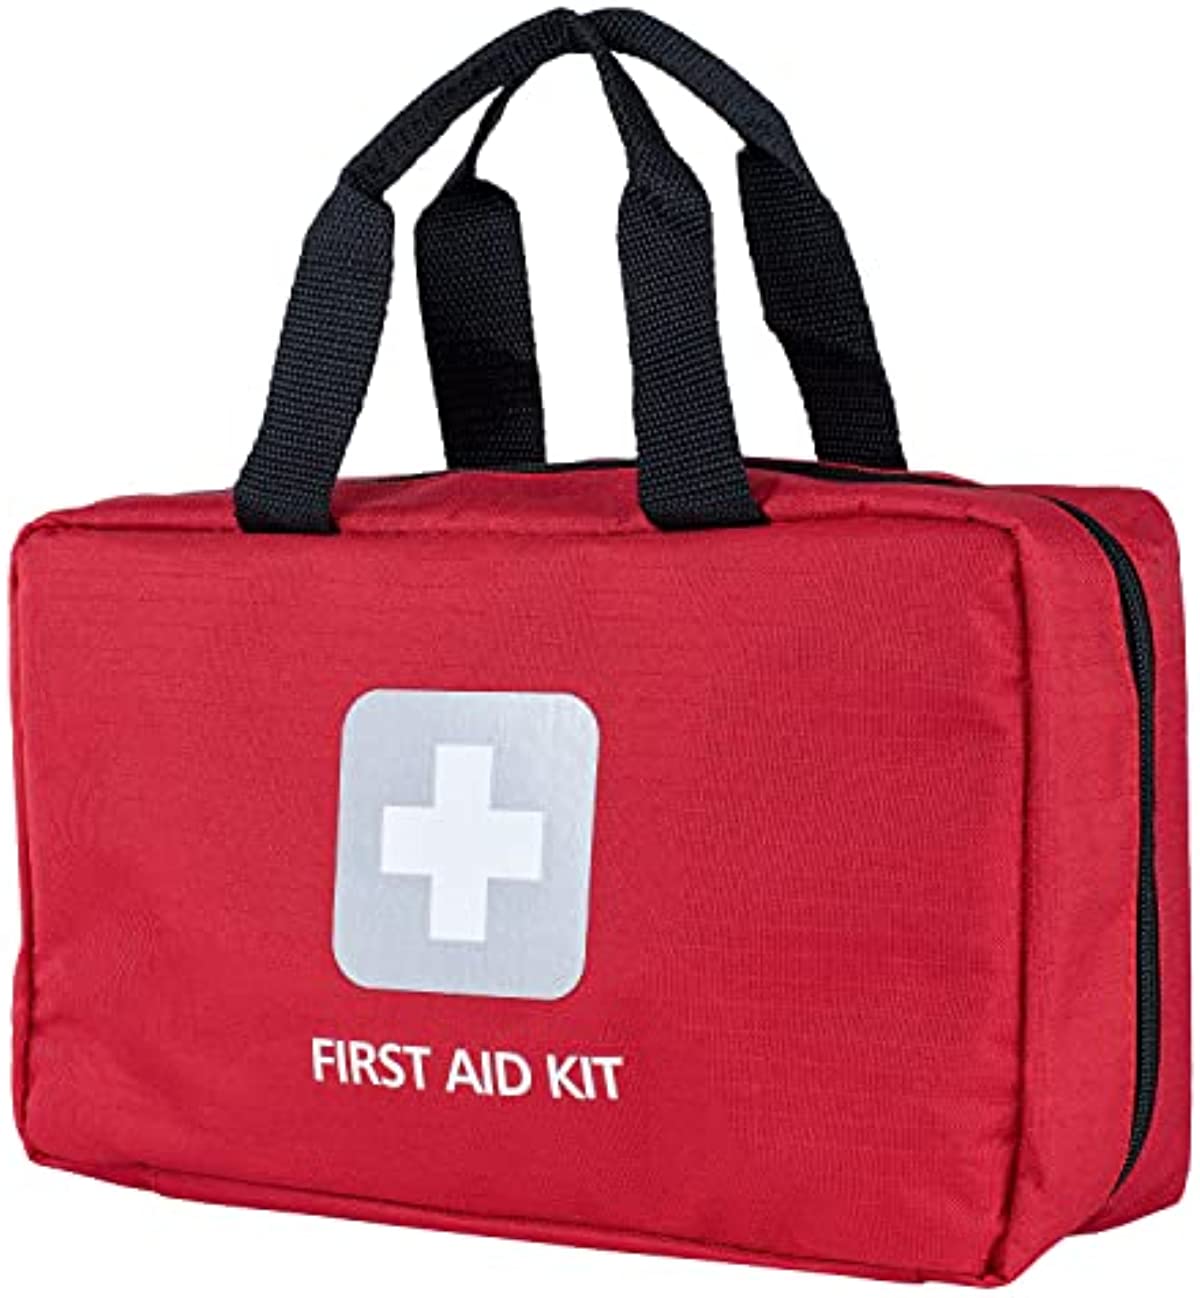 Thrive Home First Aid Kit - Large, 300 Piece Emergency Medical Kit - FSA HSA Approved Products for Camping, Hiking, Car, Boat, & Office - Sports Med Bag with First Aid Supplies